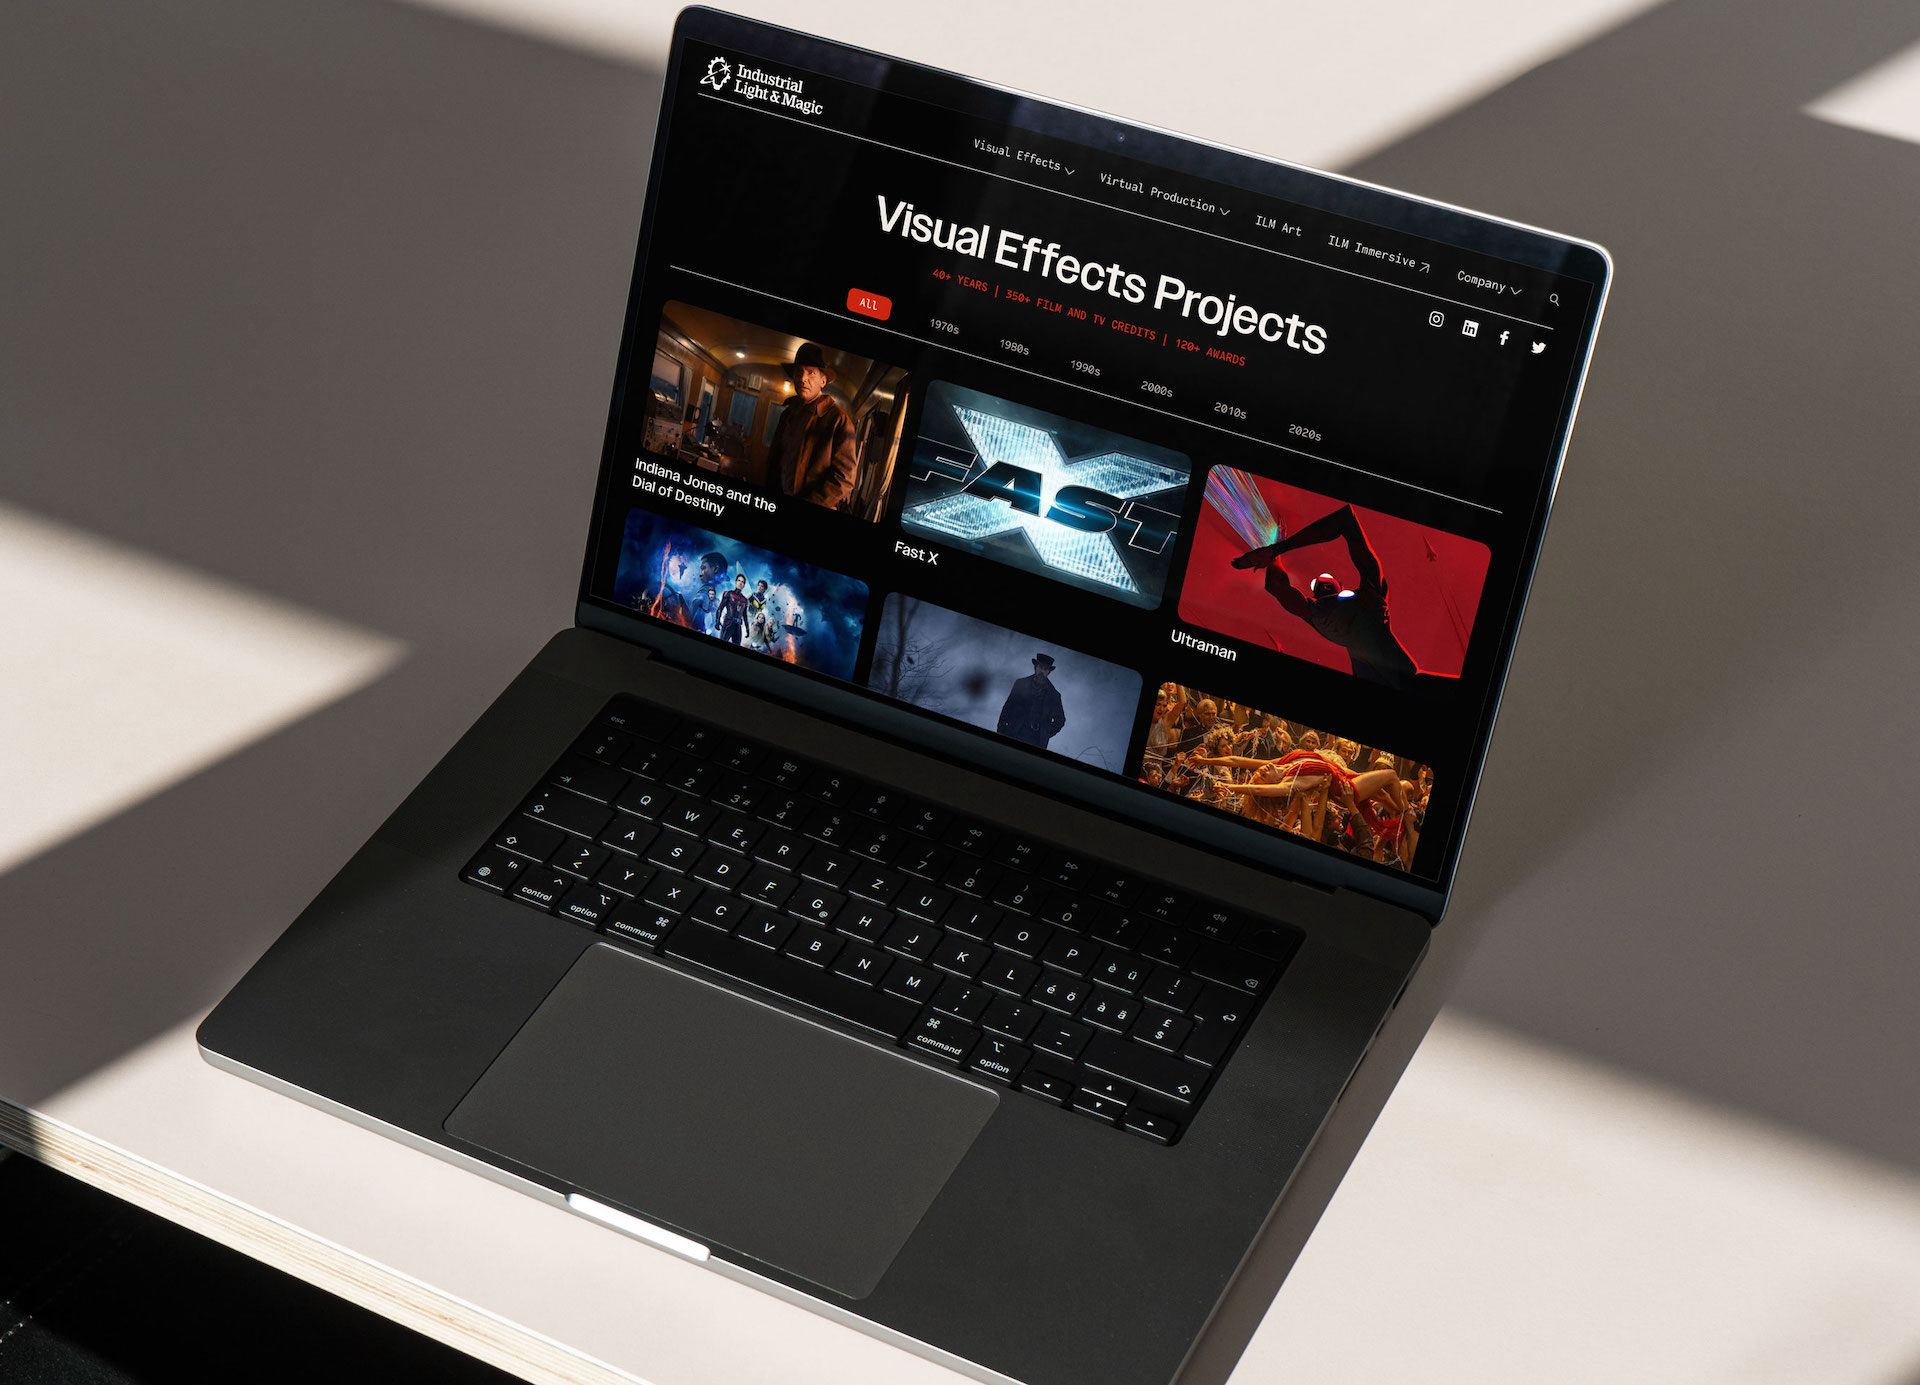 Laptop showing the ILM Projects webpage